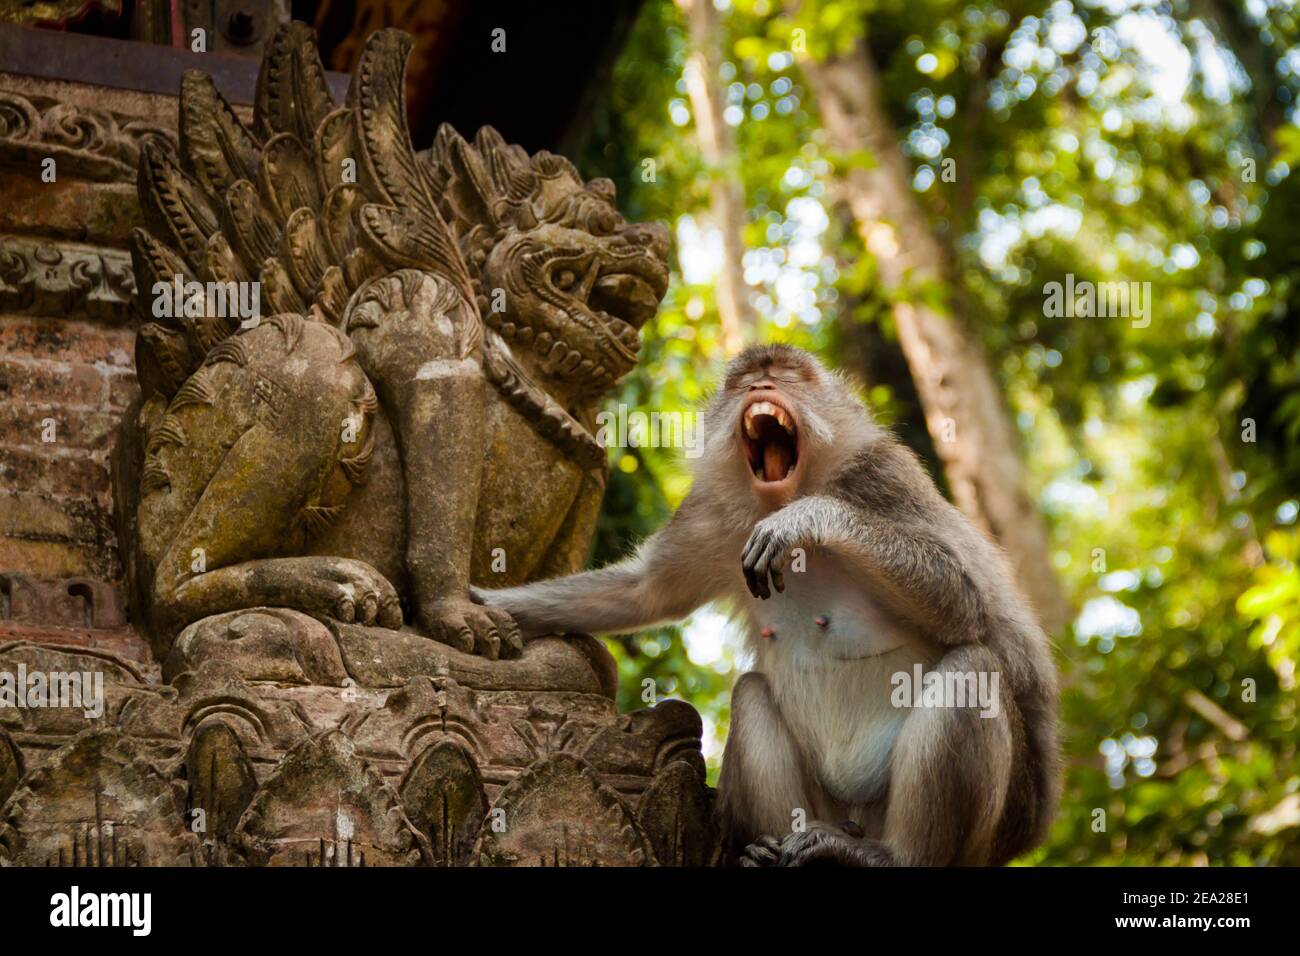 A crab-eating macaque (macaca fascicularis) sitting on the walls of a temple and touching a dvarapala statue while yawning with its mouth wide open Stock Photo